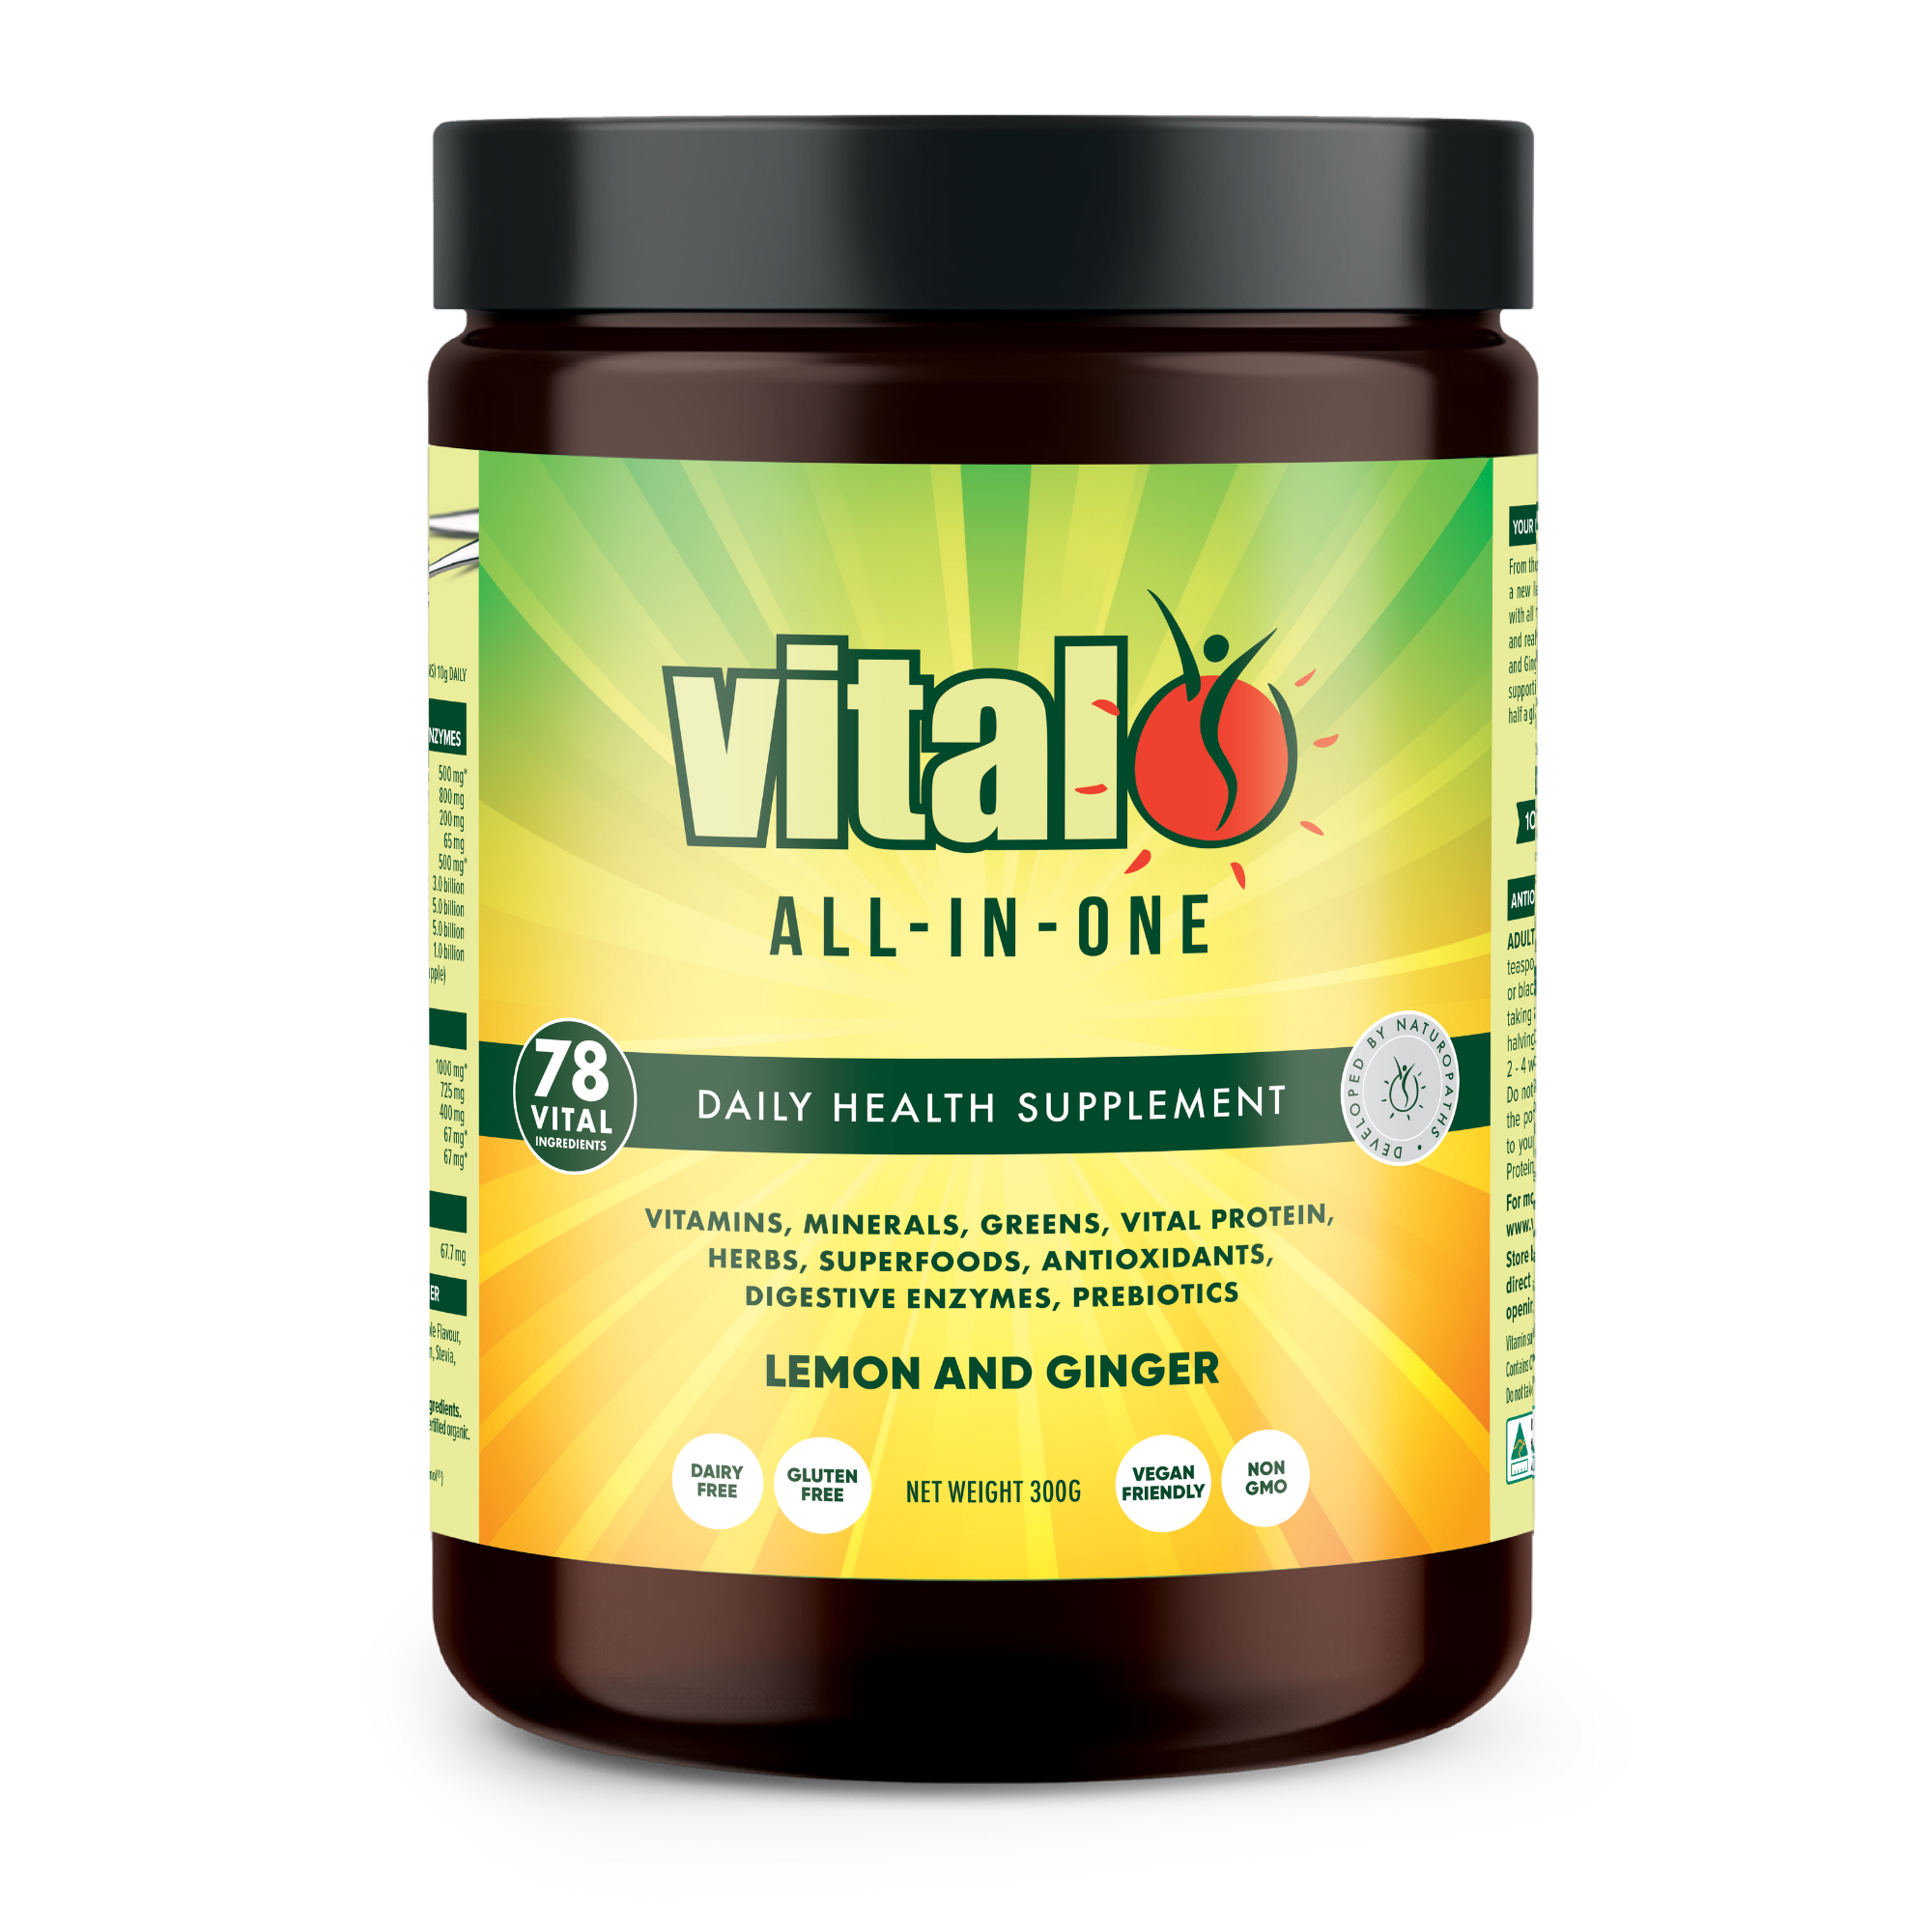 Vital All-In-One Daily Health Supplement - Lemon and Ginger